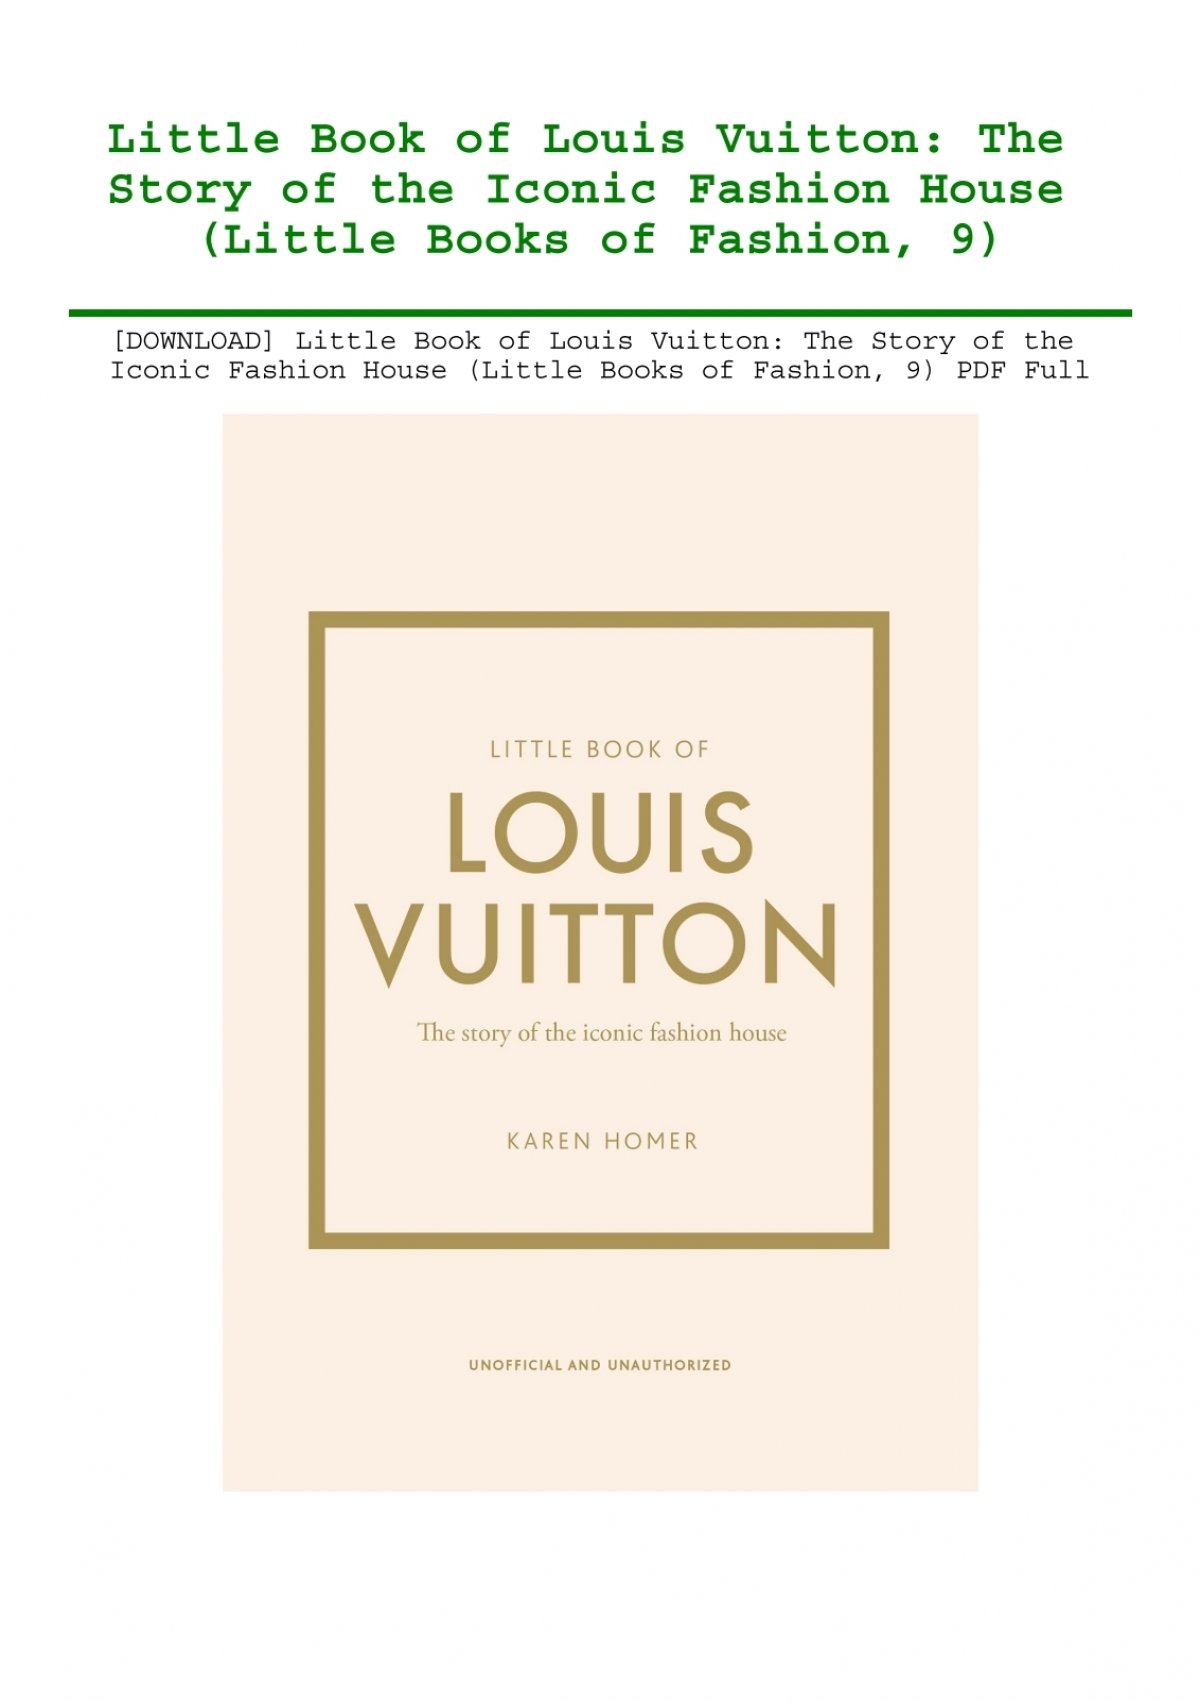 Download !PDF Little Book of Louis Vuitton: The Story of the Iconic Fashion  House (Little Books of F by asaramirez - Issuu